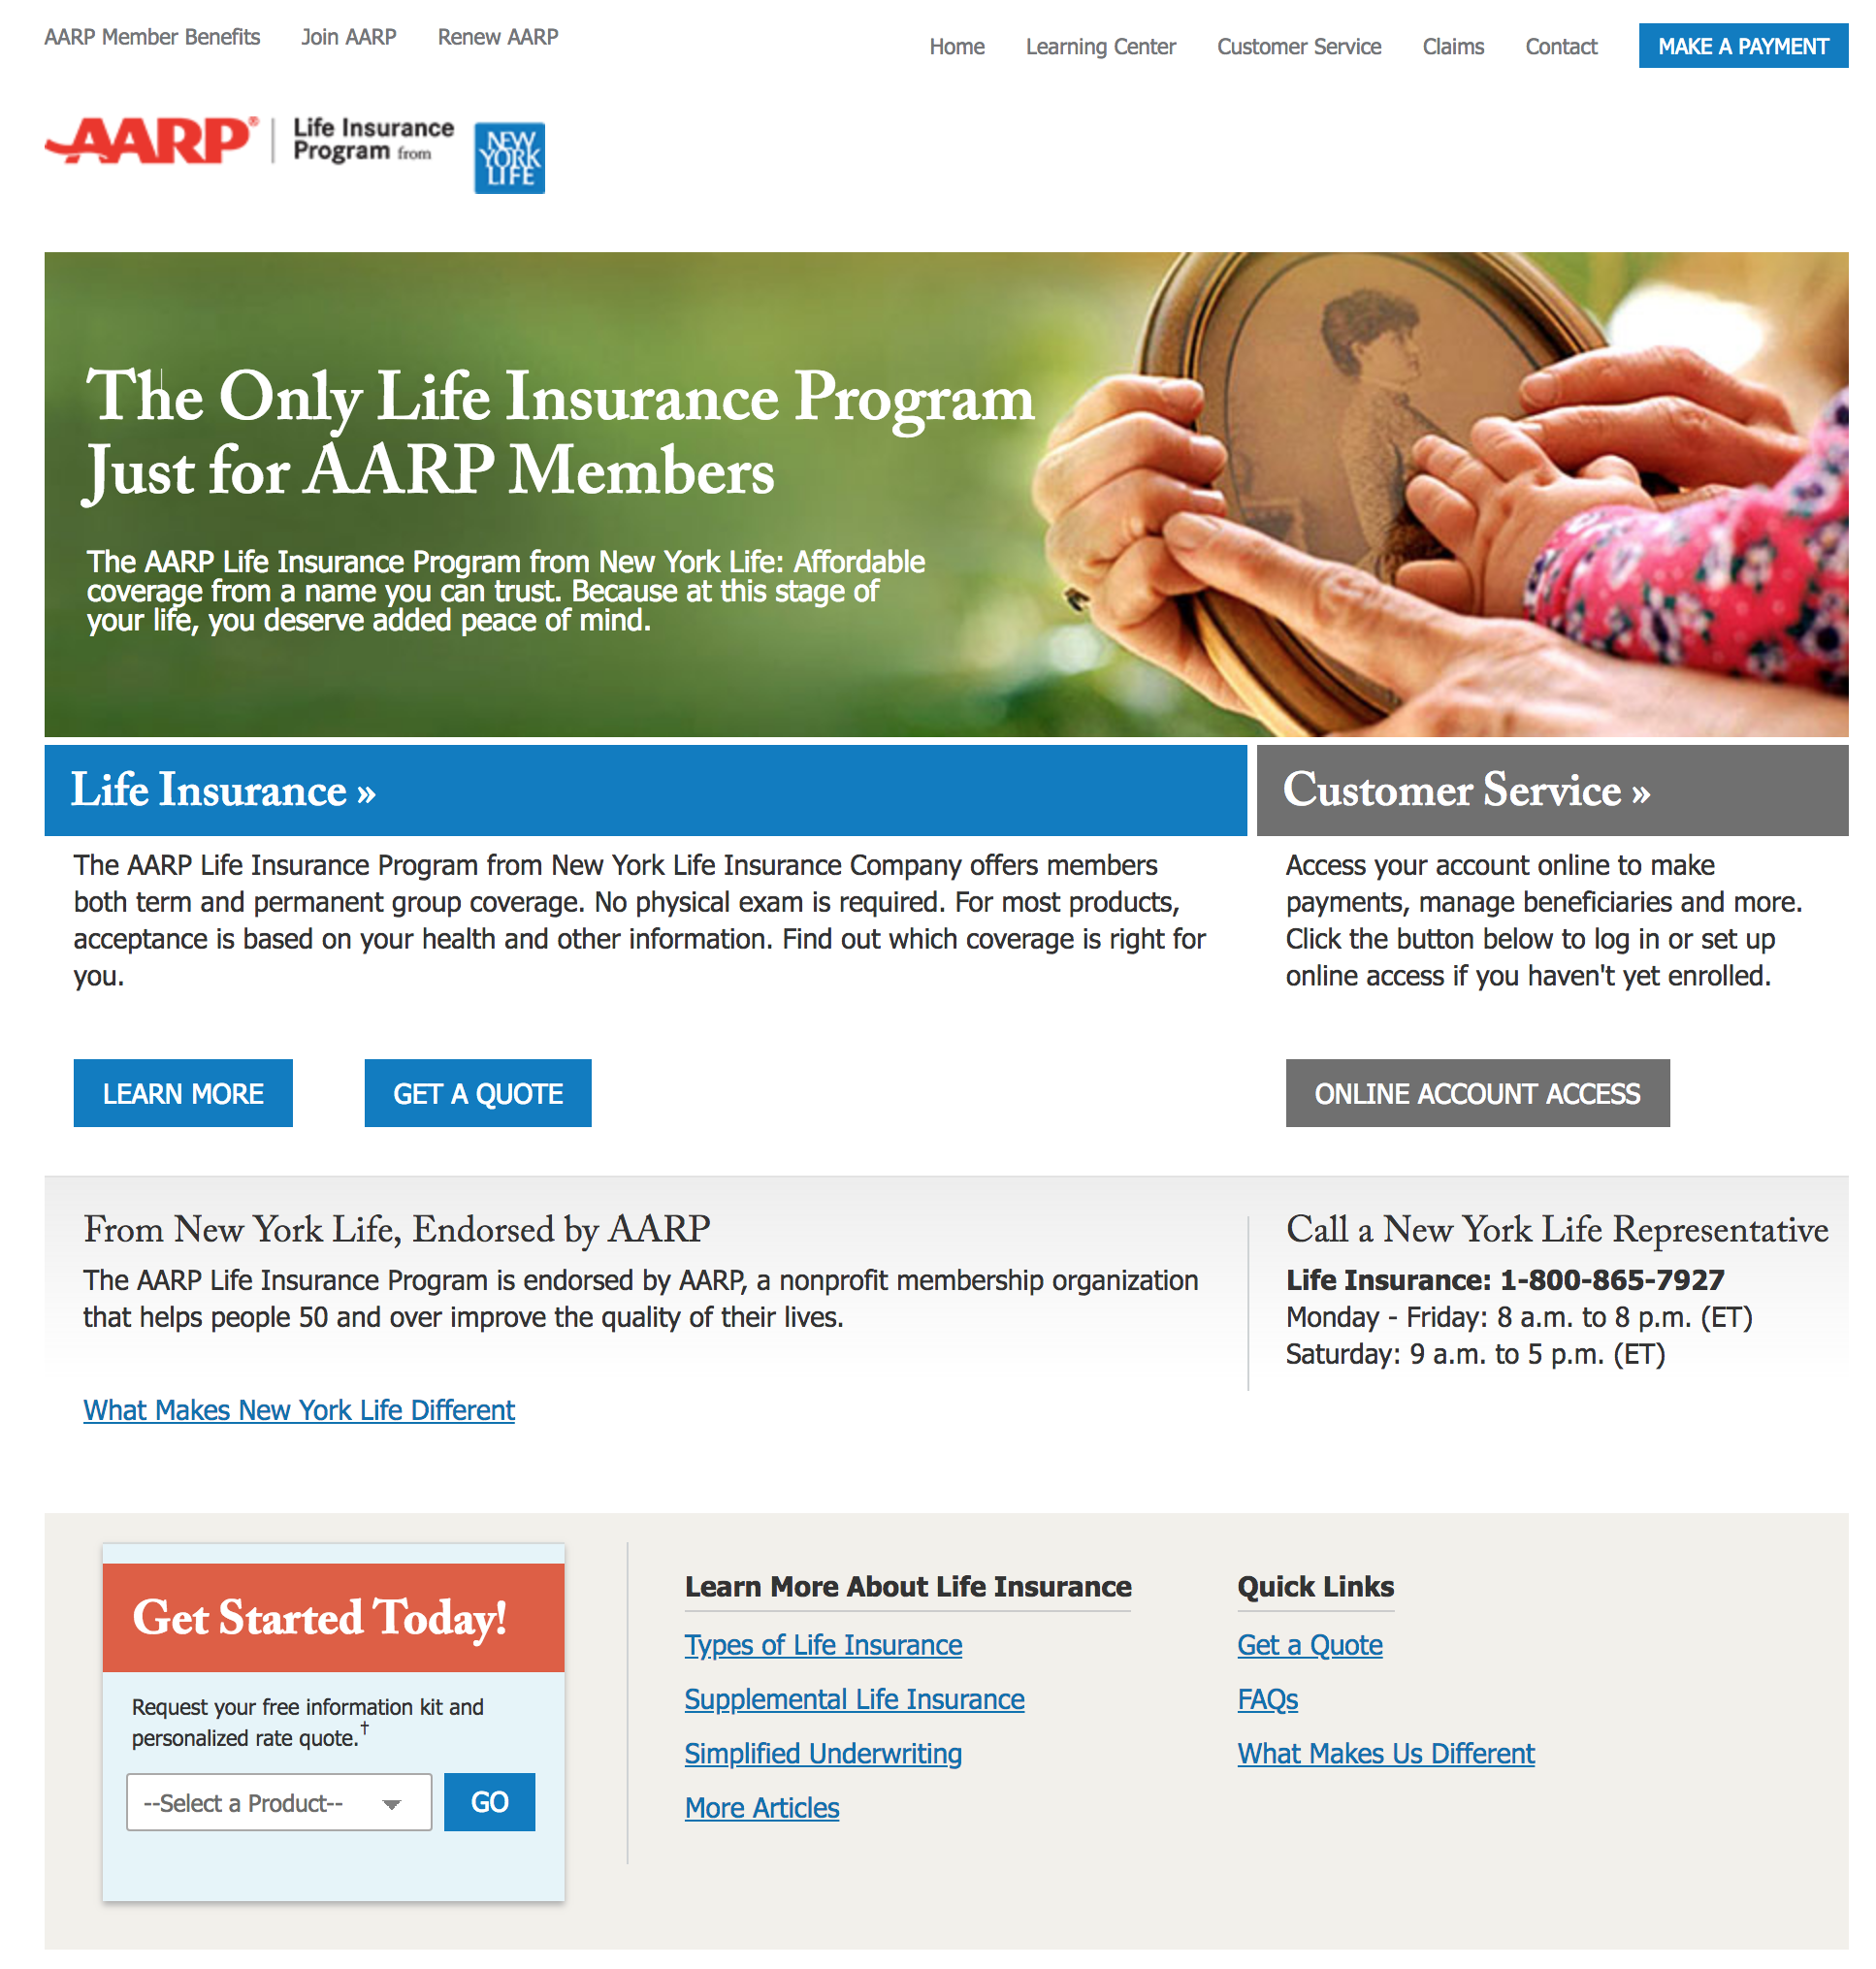 Aarp Term Life Rate Chart